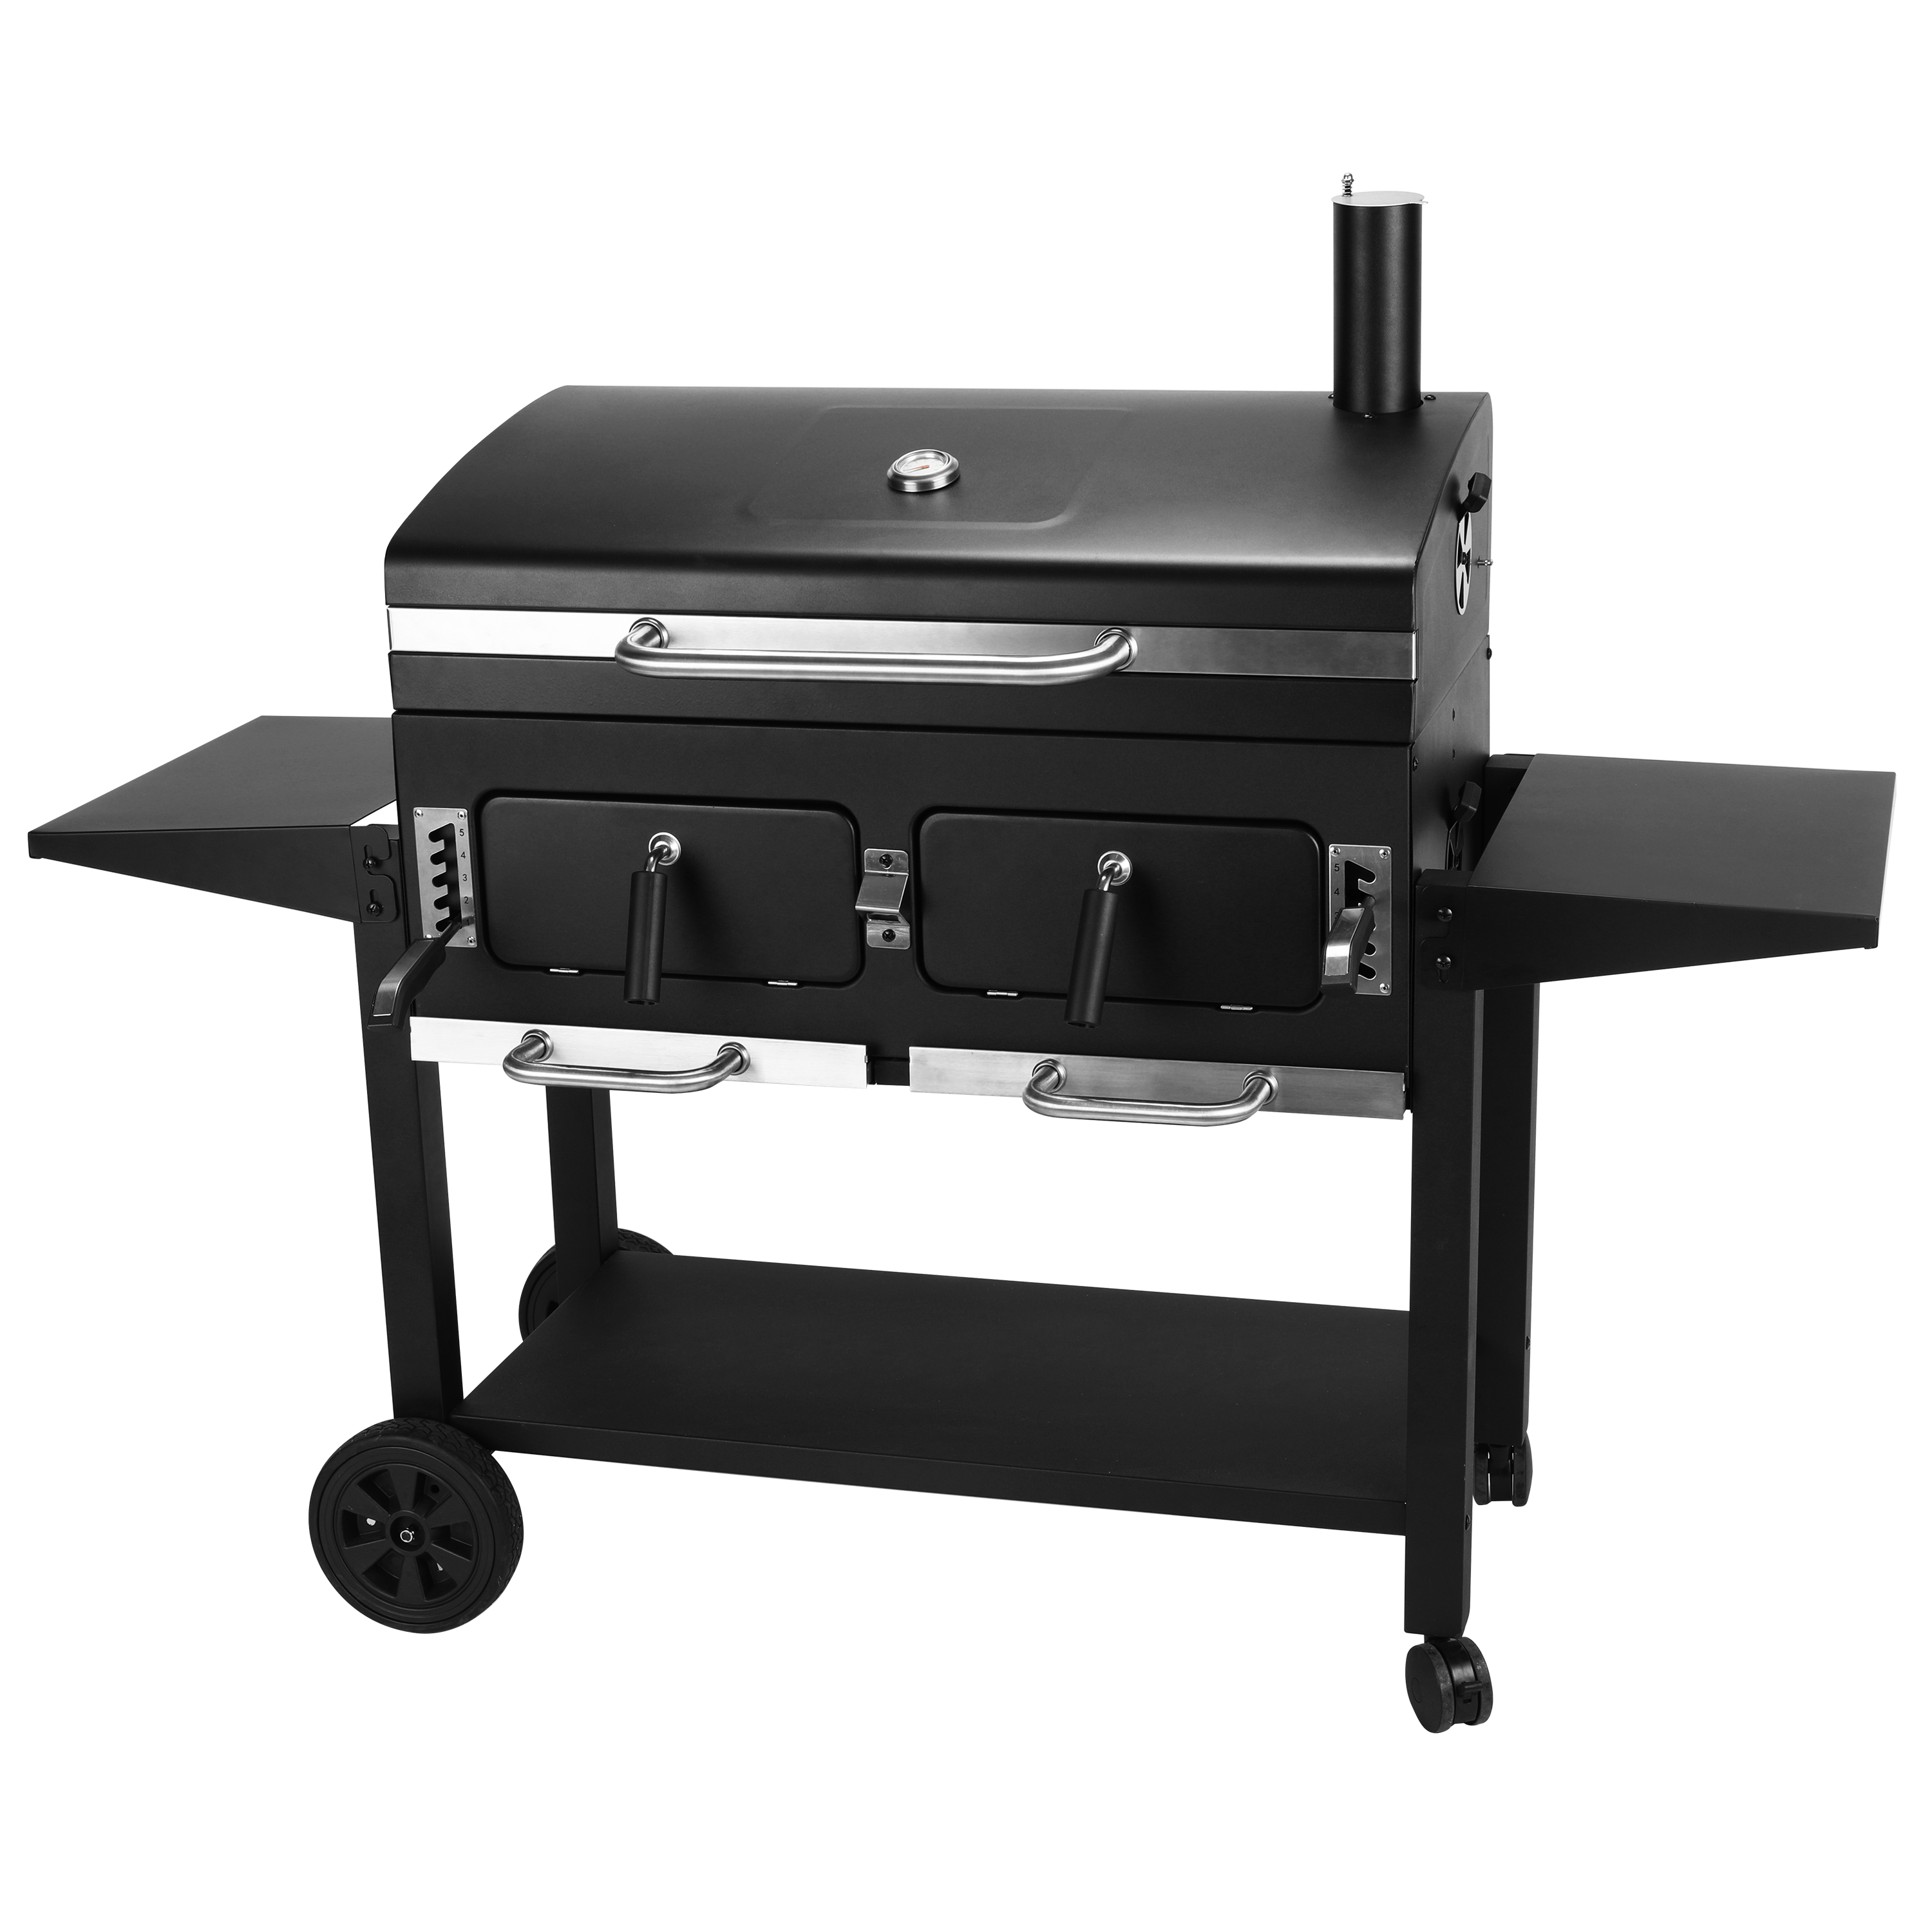 KING SIZE CHARCOAL BARBECUE With 2 independent burners - best price from Maltashopper.com BR500013558